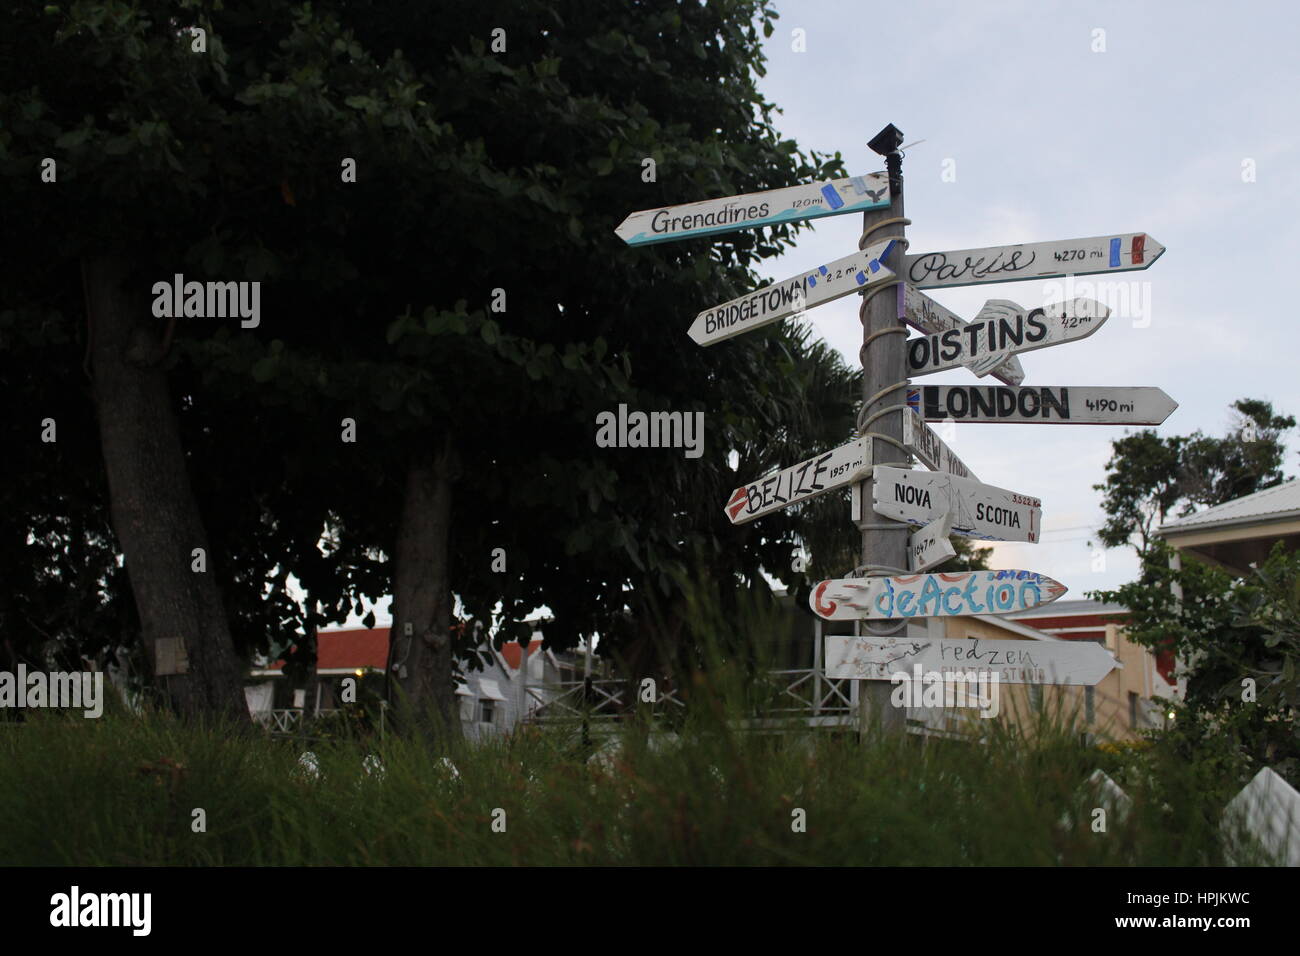 A sign shows the distance in miles to various world destinations on a beach in Hasting, Barbados, Caribbean. Stock Photo